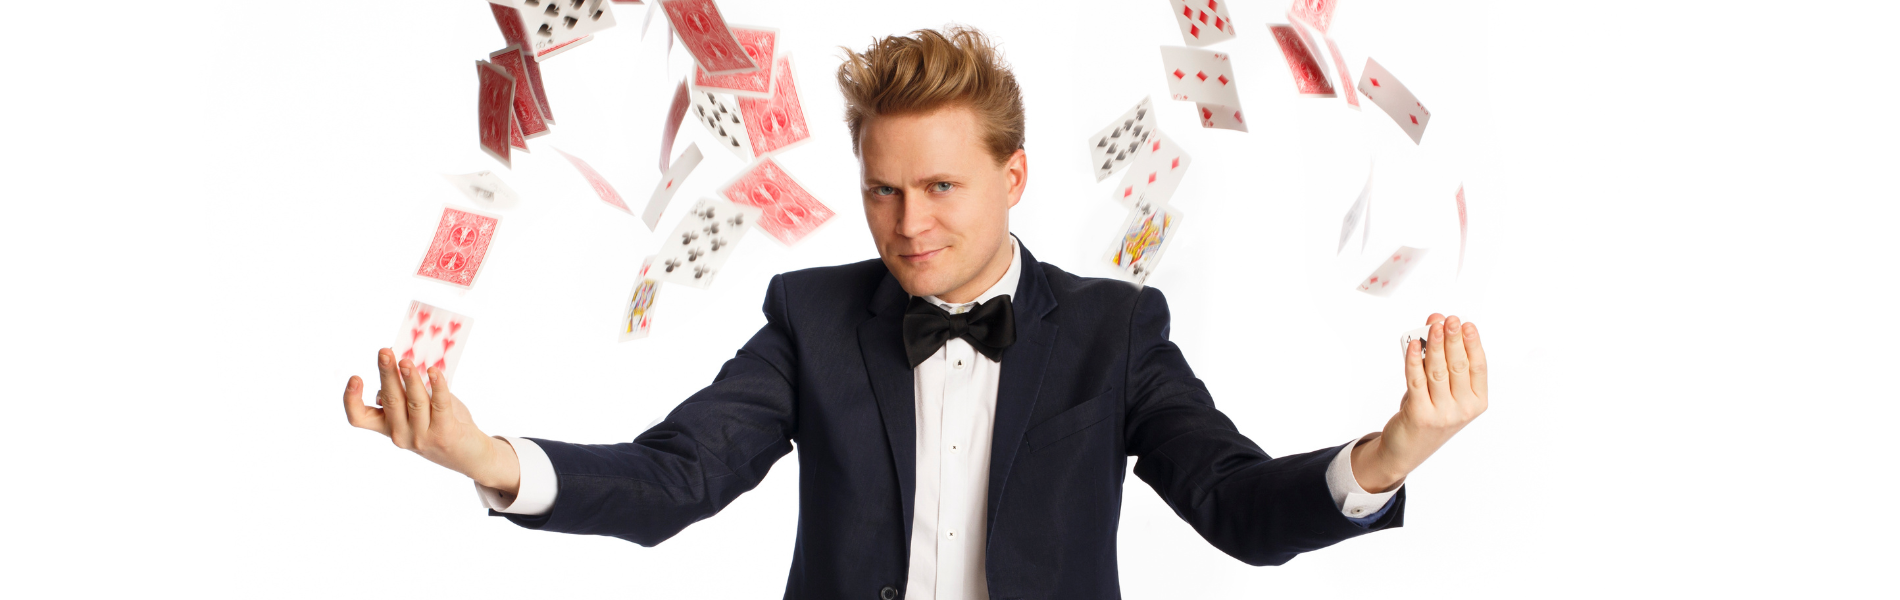 A magician with his arms extended, cards flying in an arc from his hands